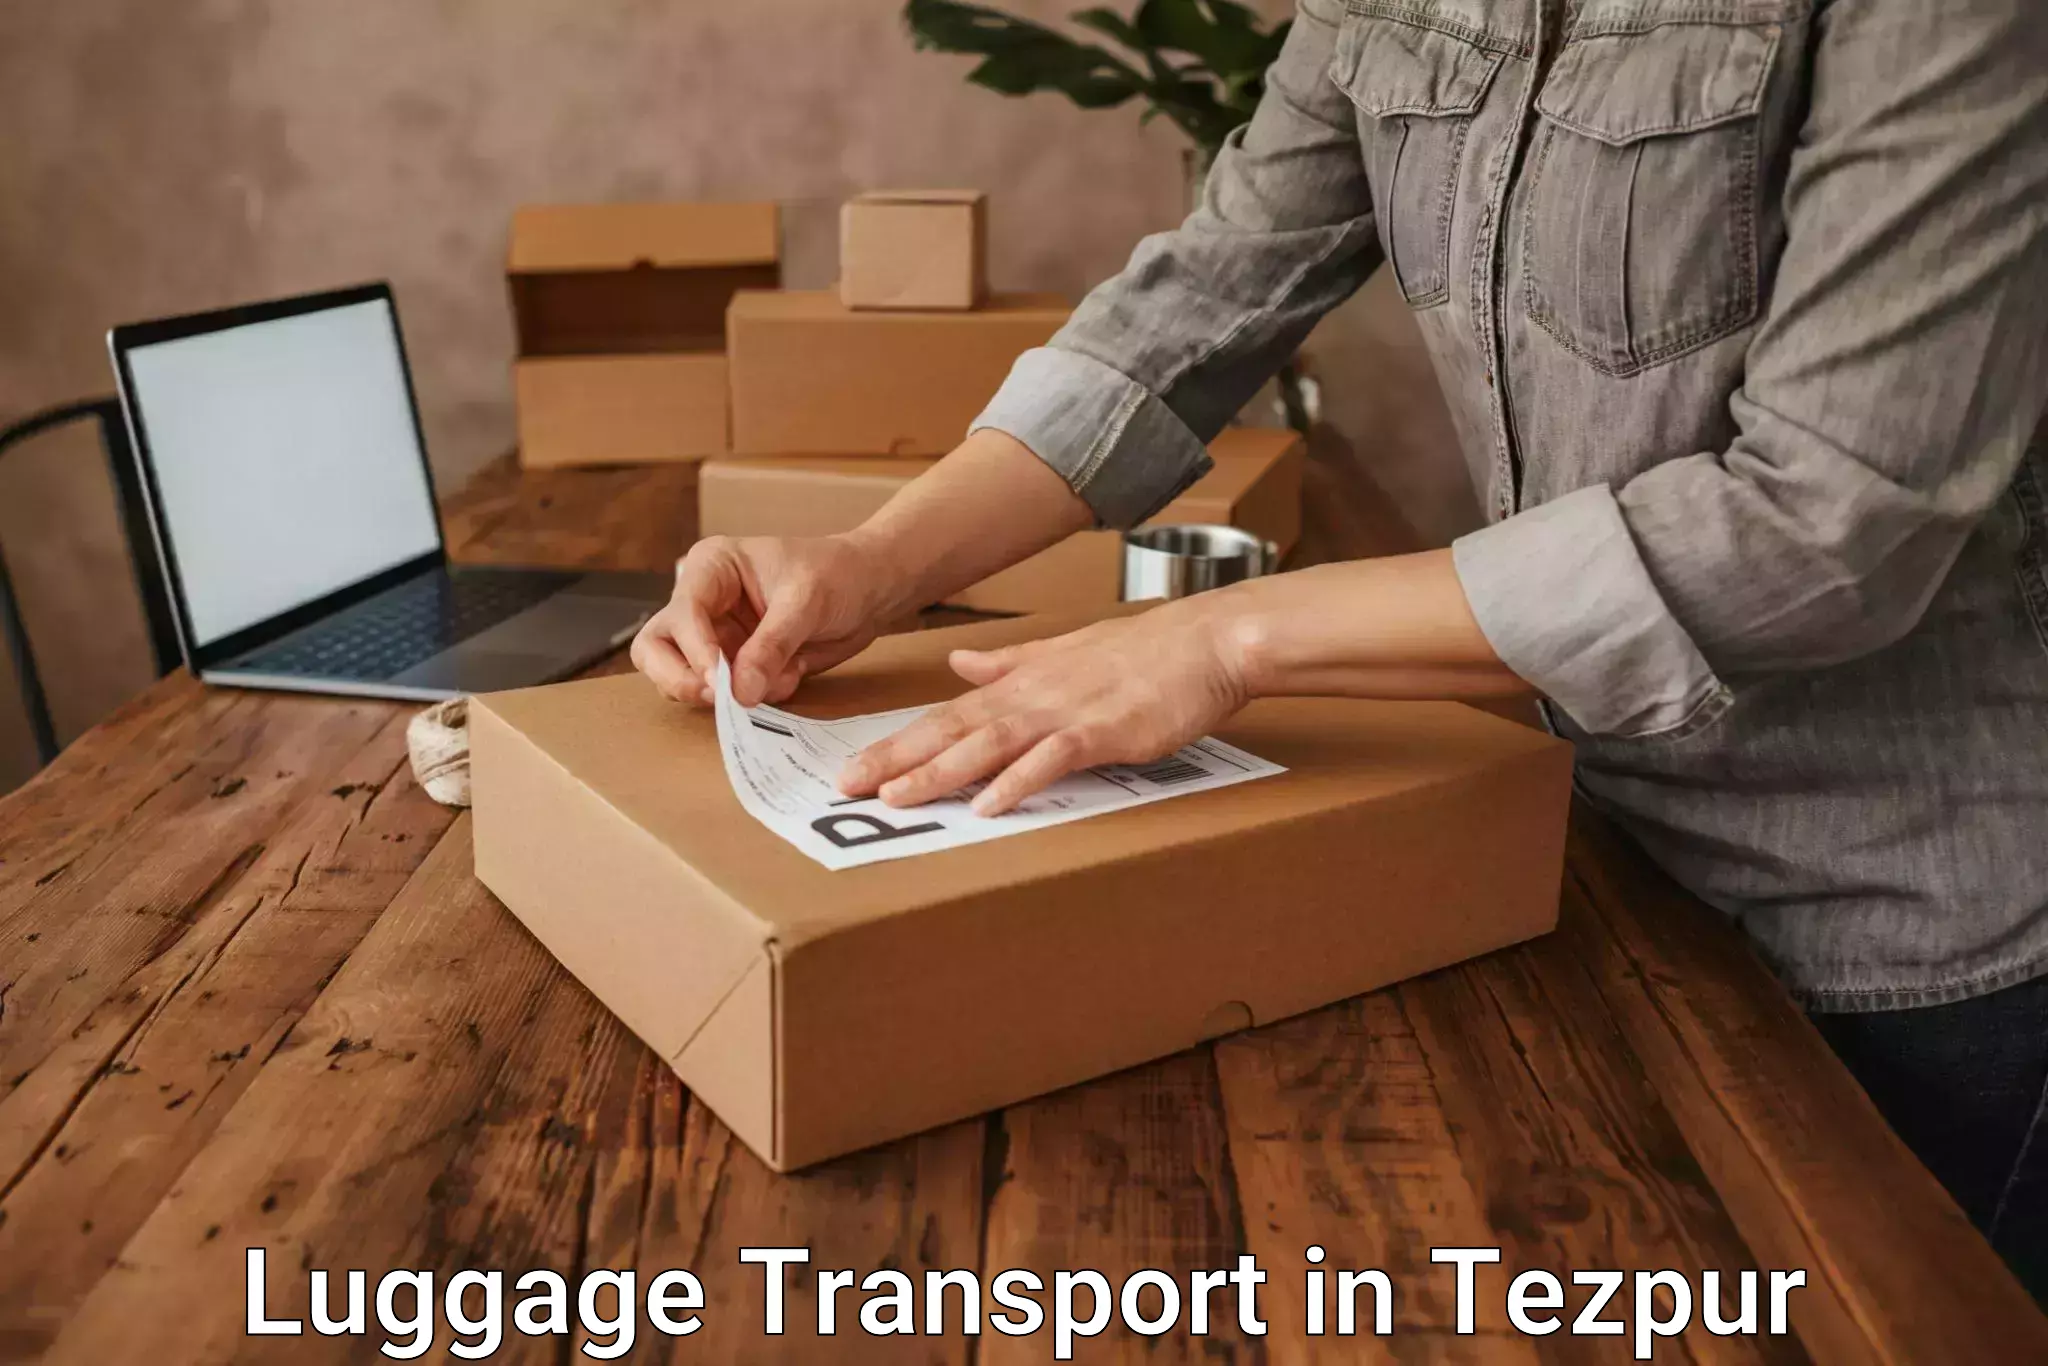 Baggage transport cost in Tezpur